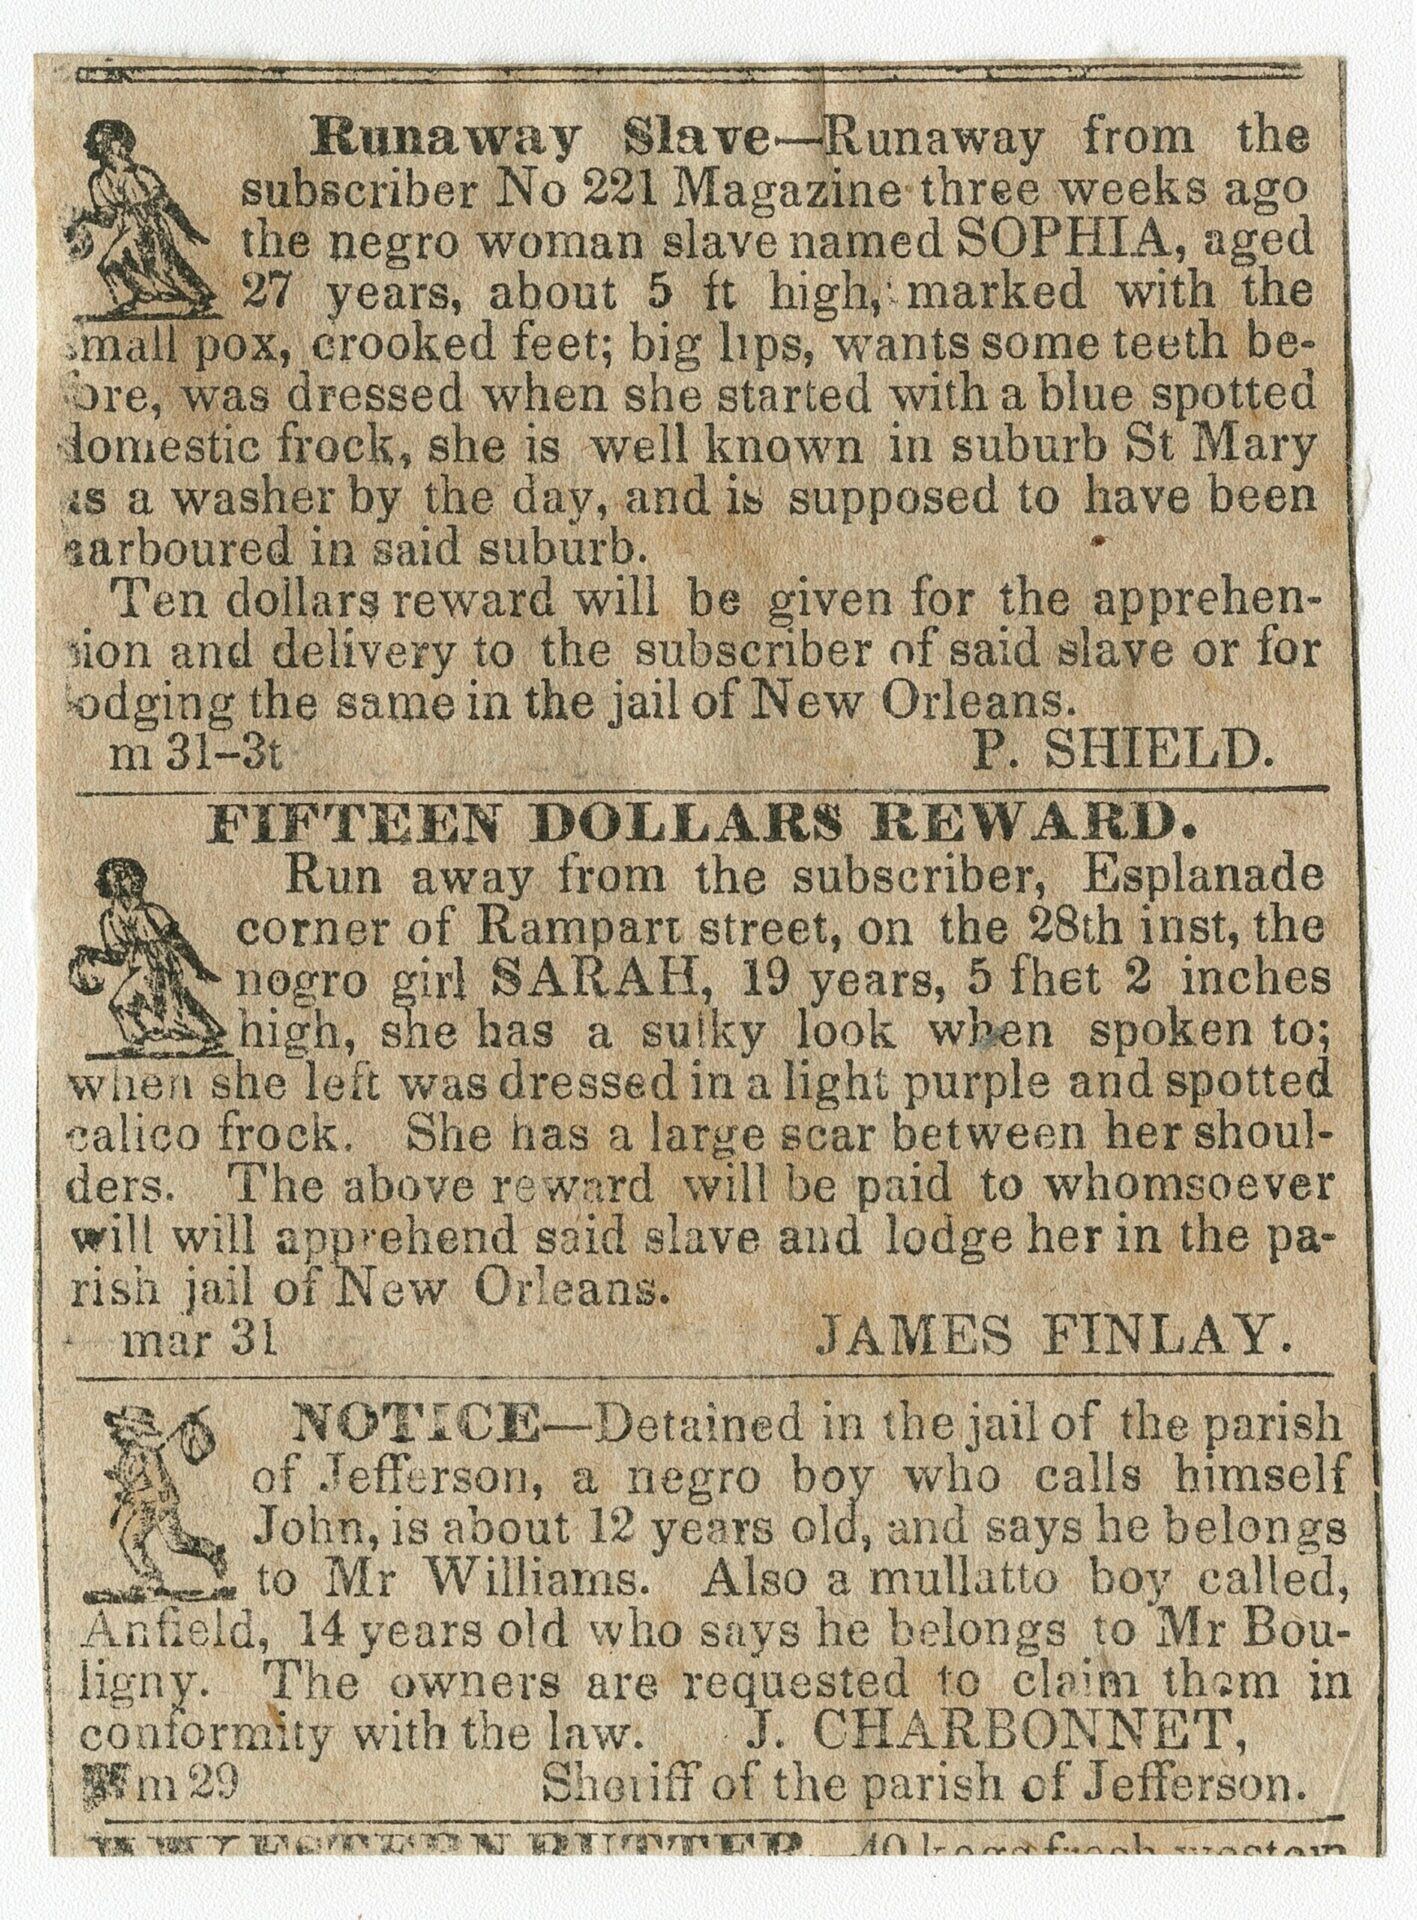 Newspaper Notices Documenting the Self-Emancipating Actions of Enslaved People, 1836